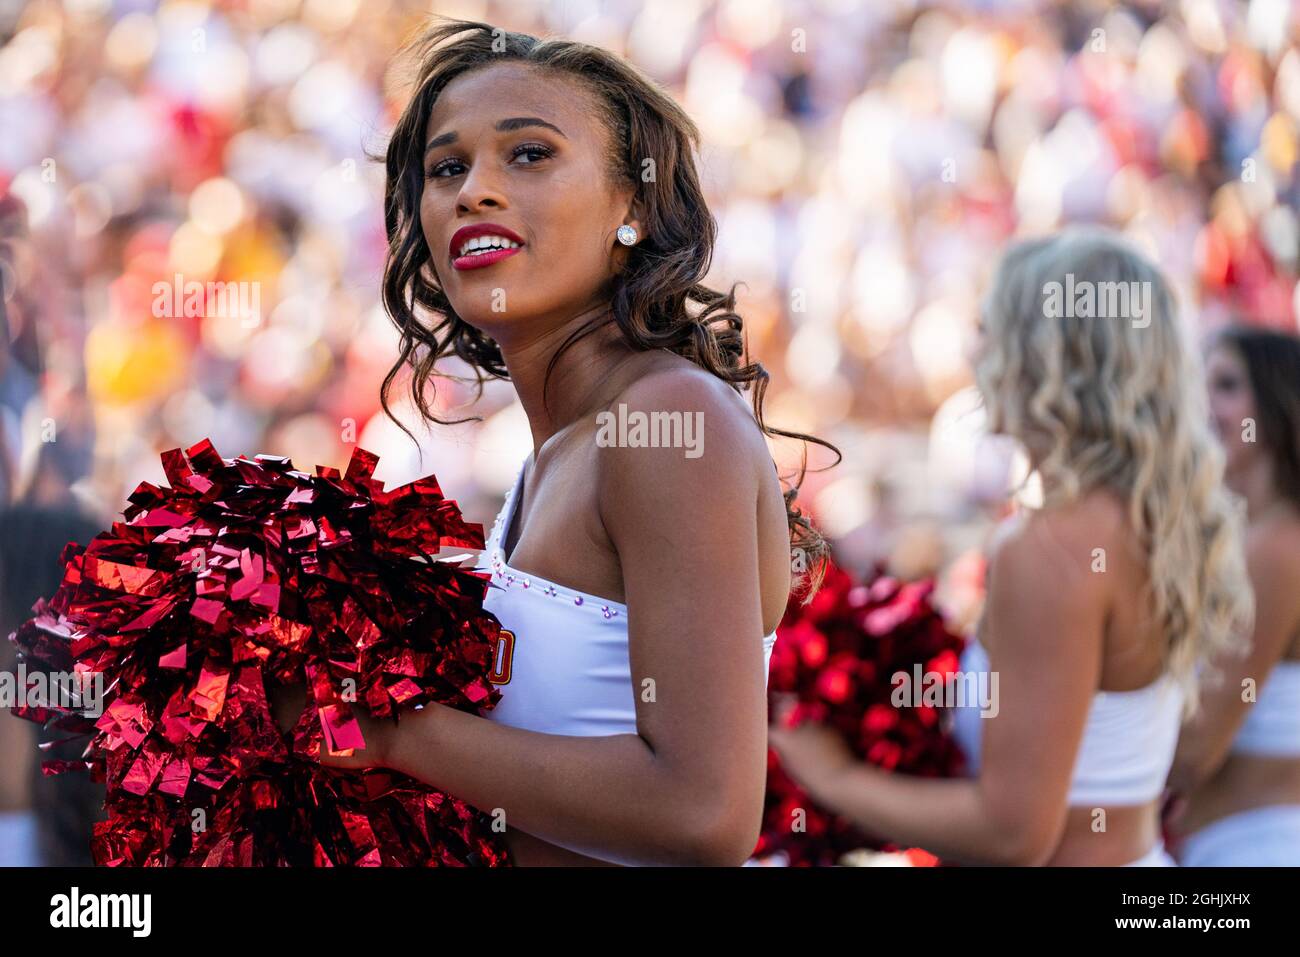 A Maryland Terrapins cheerleader looks on during the NCAA college football game between West Virginia and Maryland on Saturday September 4, 2021 at Capital One Field at Maryland Stadium in College Park, MD. Jacob Kupferman/CSM Stock Photo